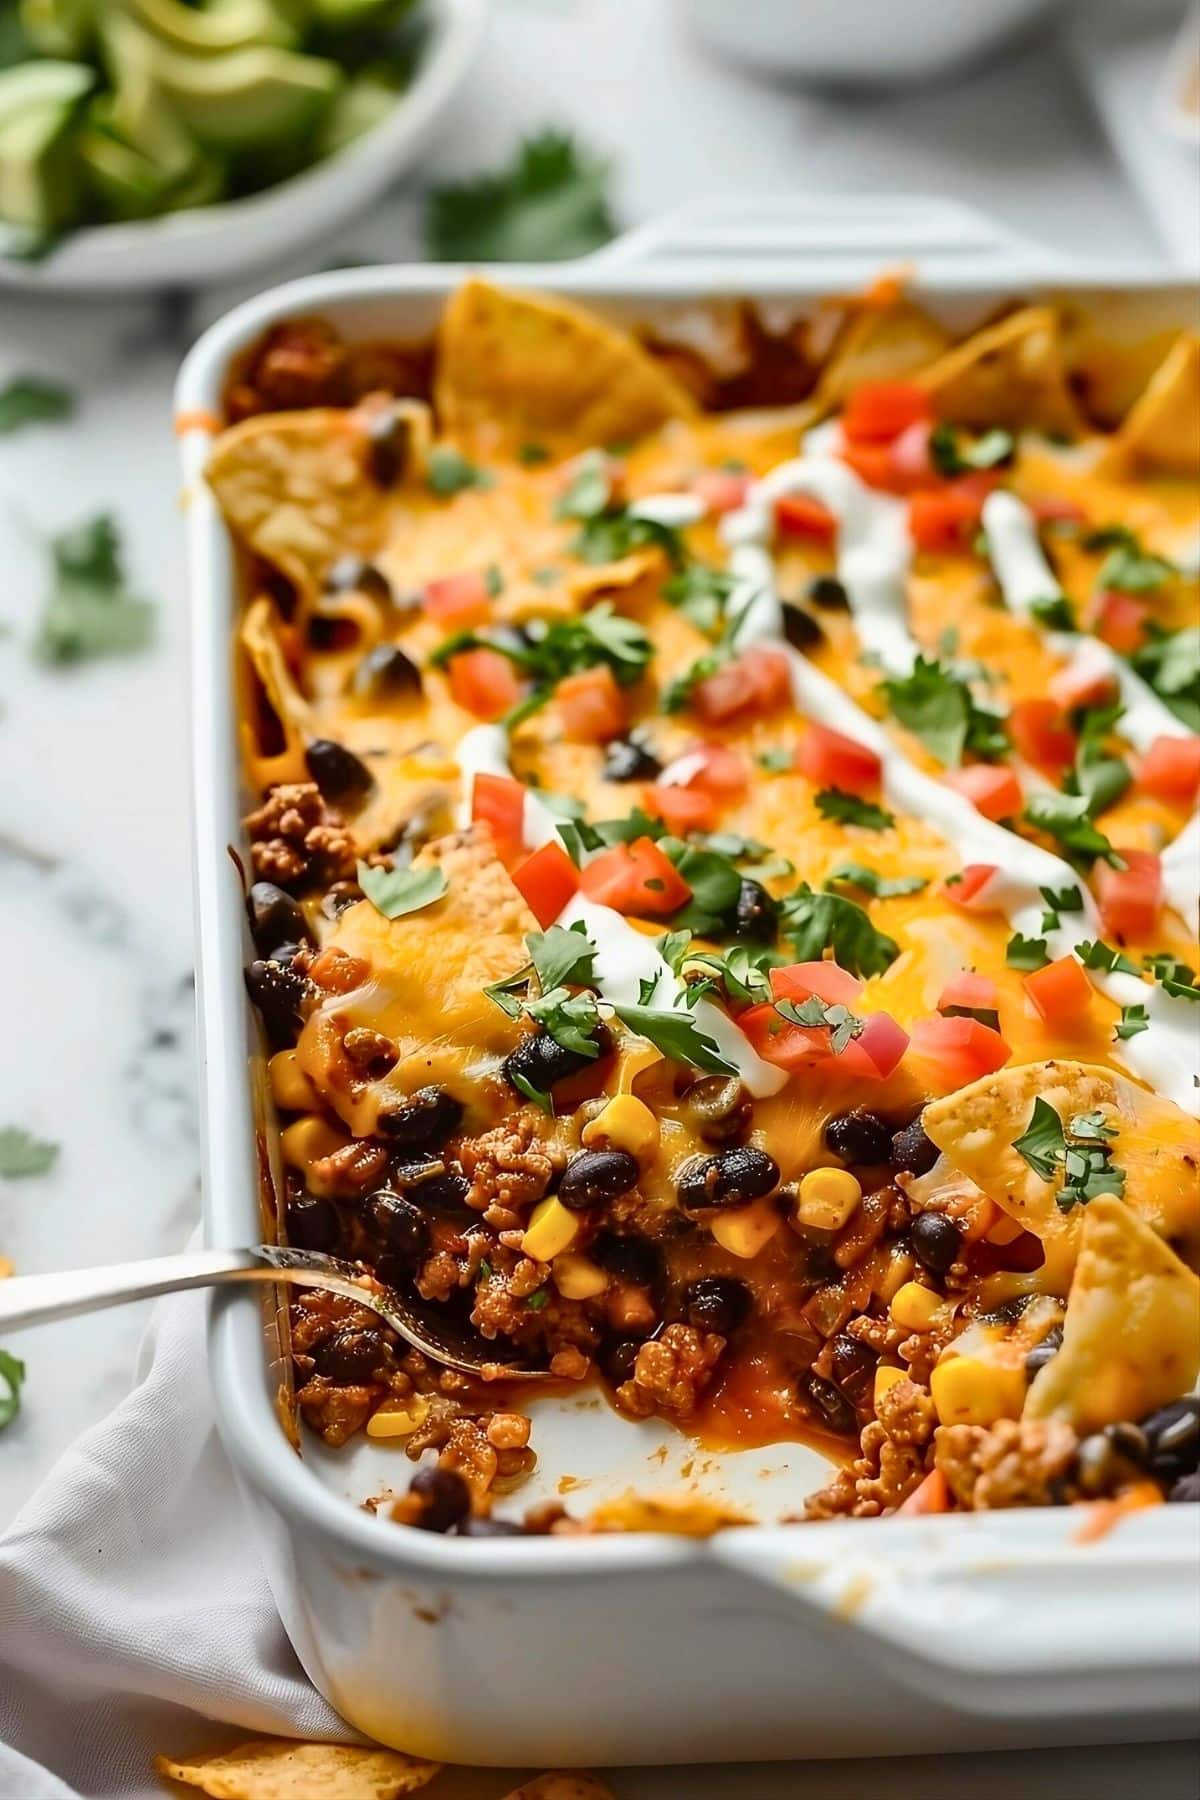 Taco casserole with sour cream drizzle and cheesy toppings.